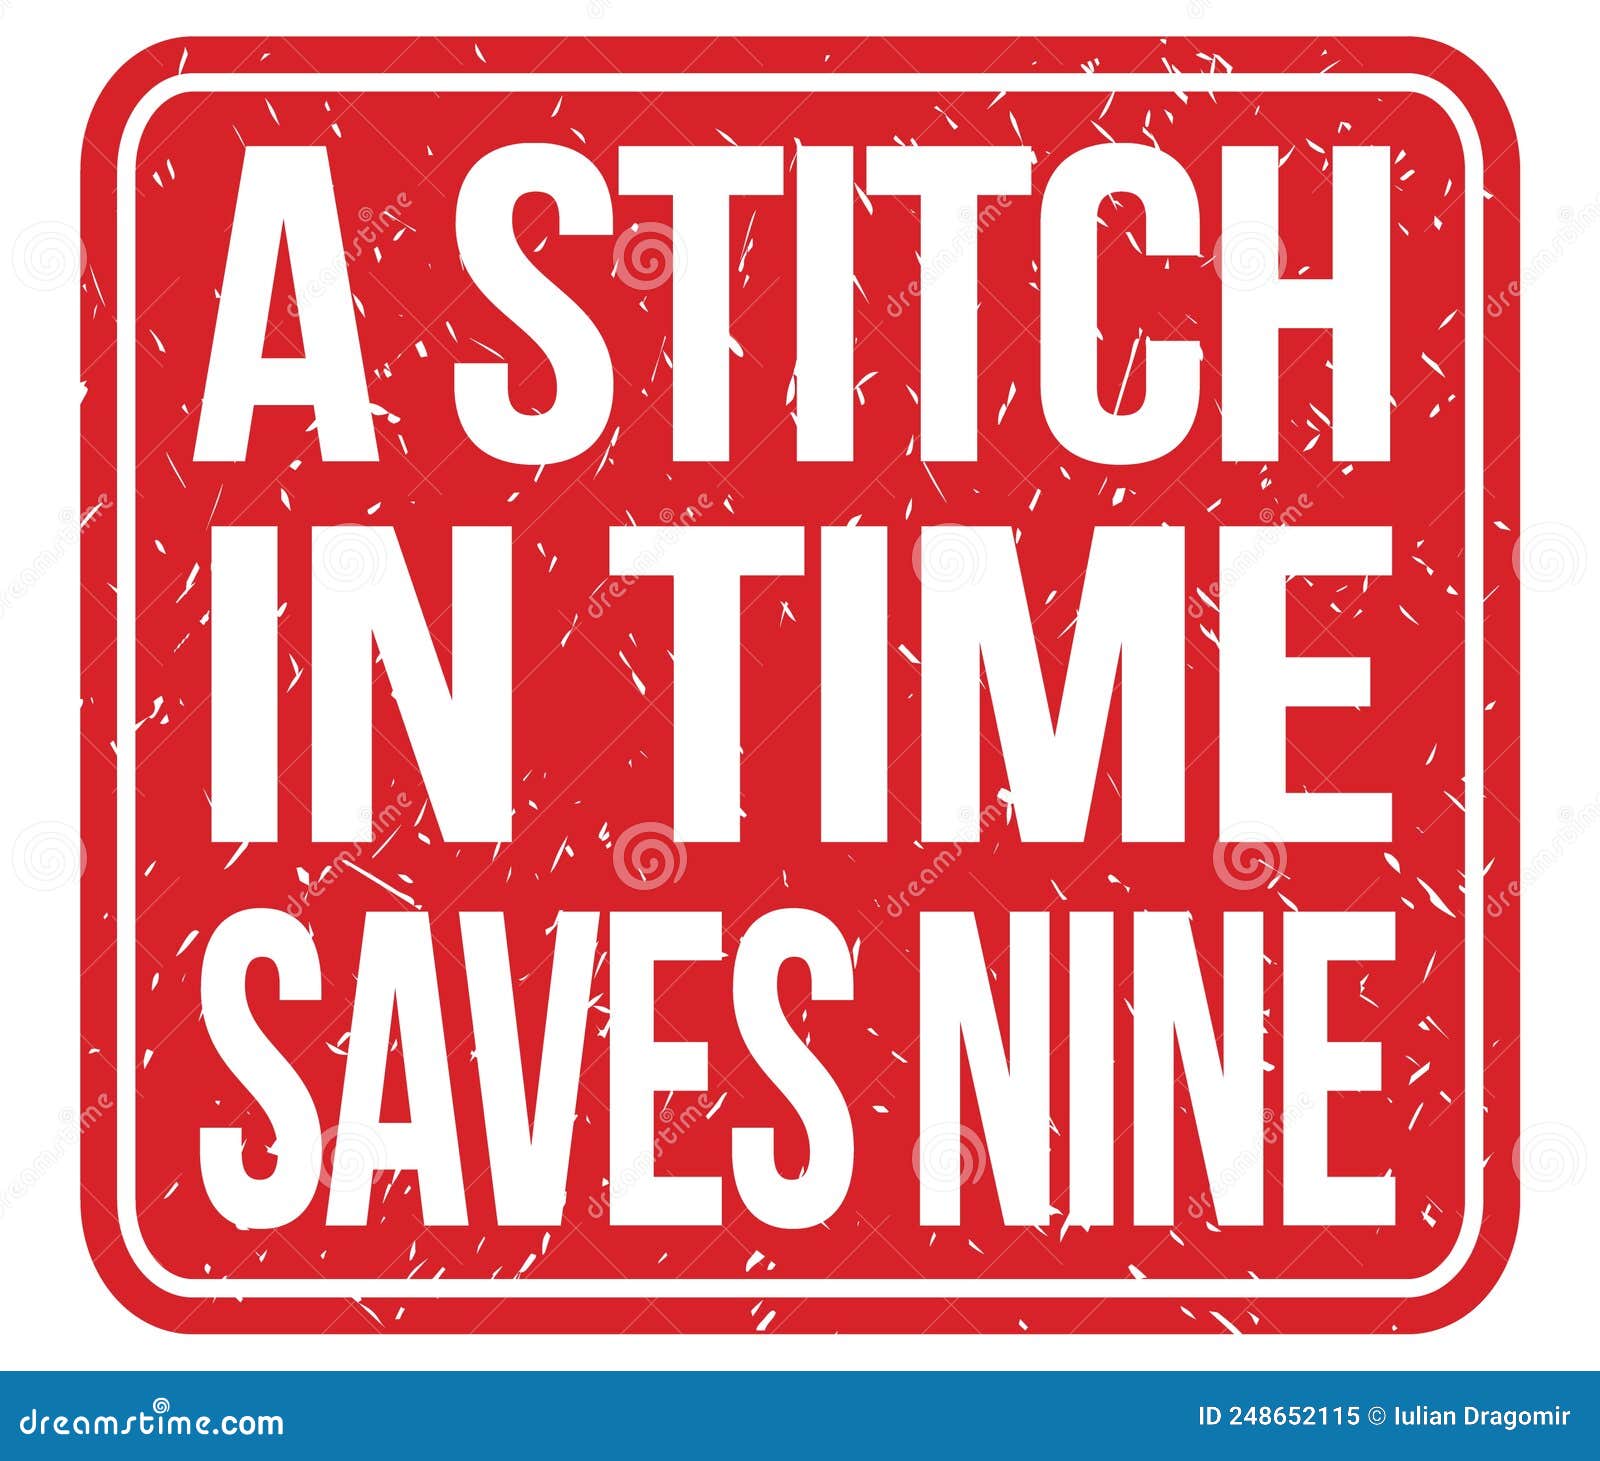 creative writing on a stitch in time saves nine